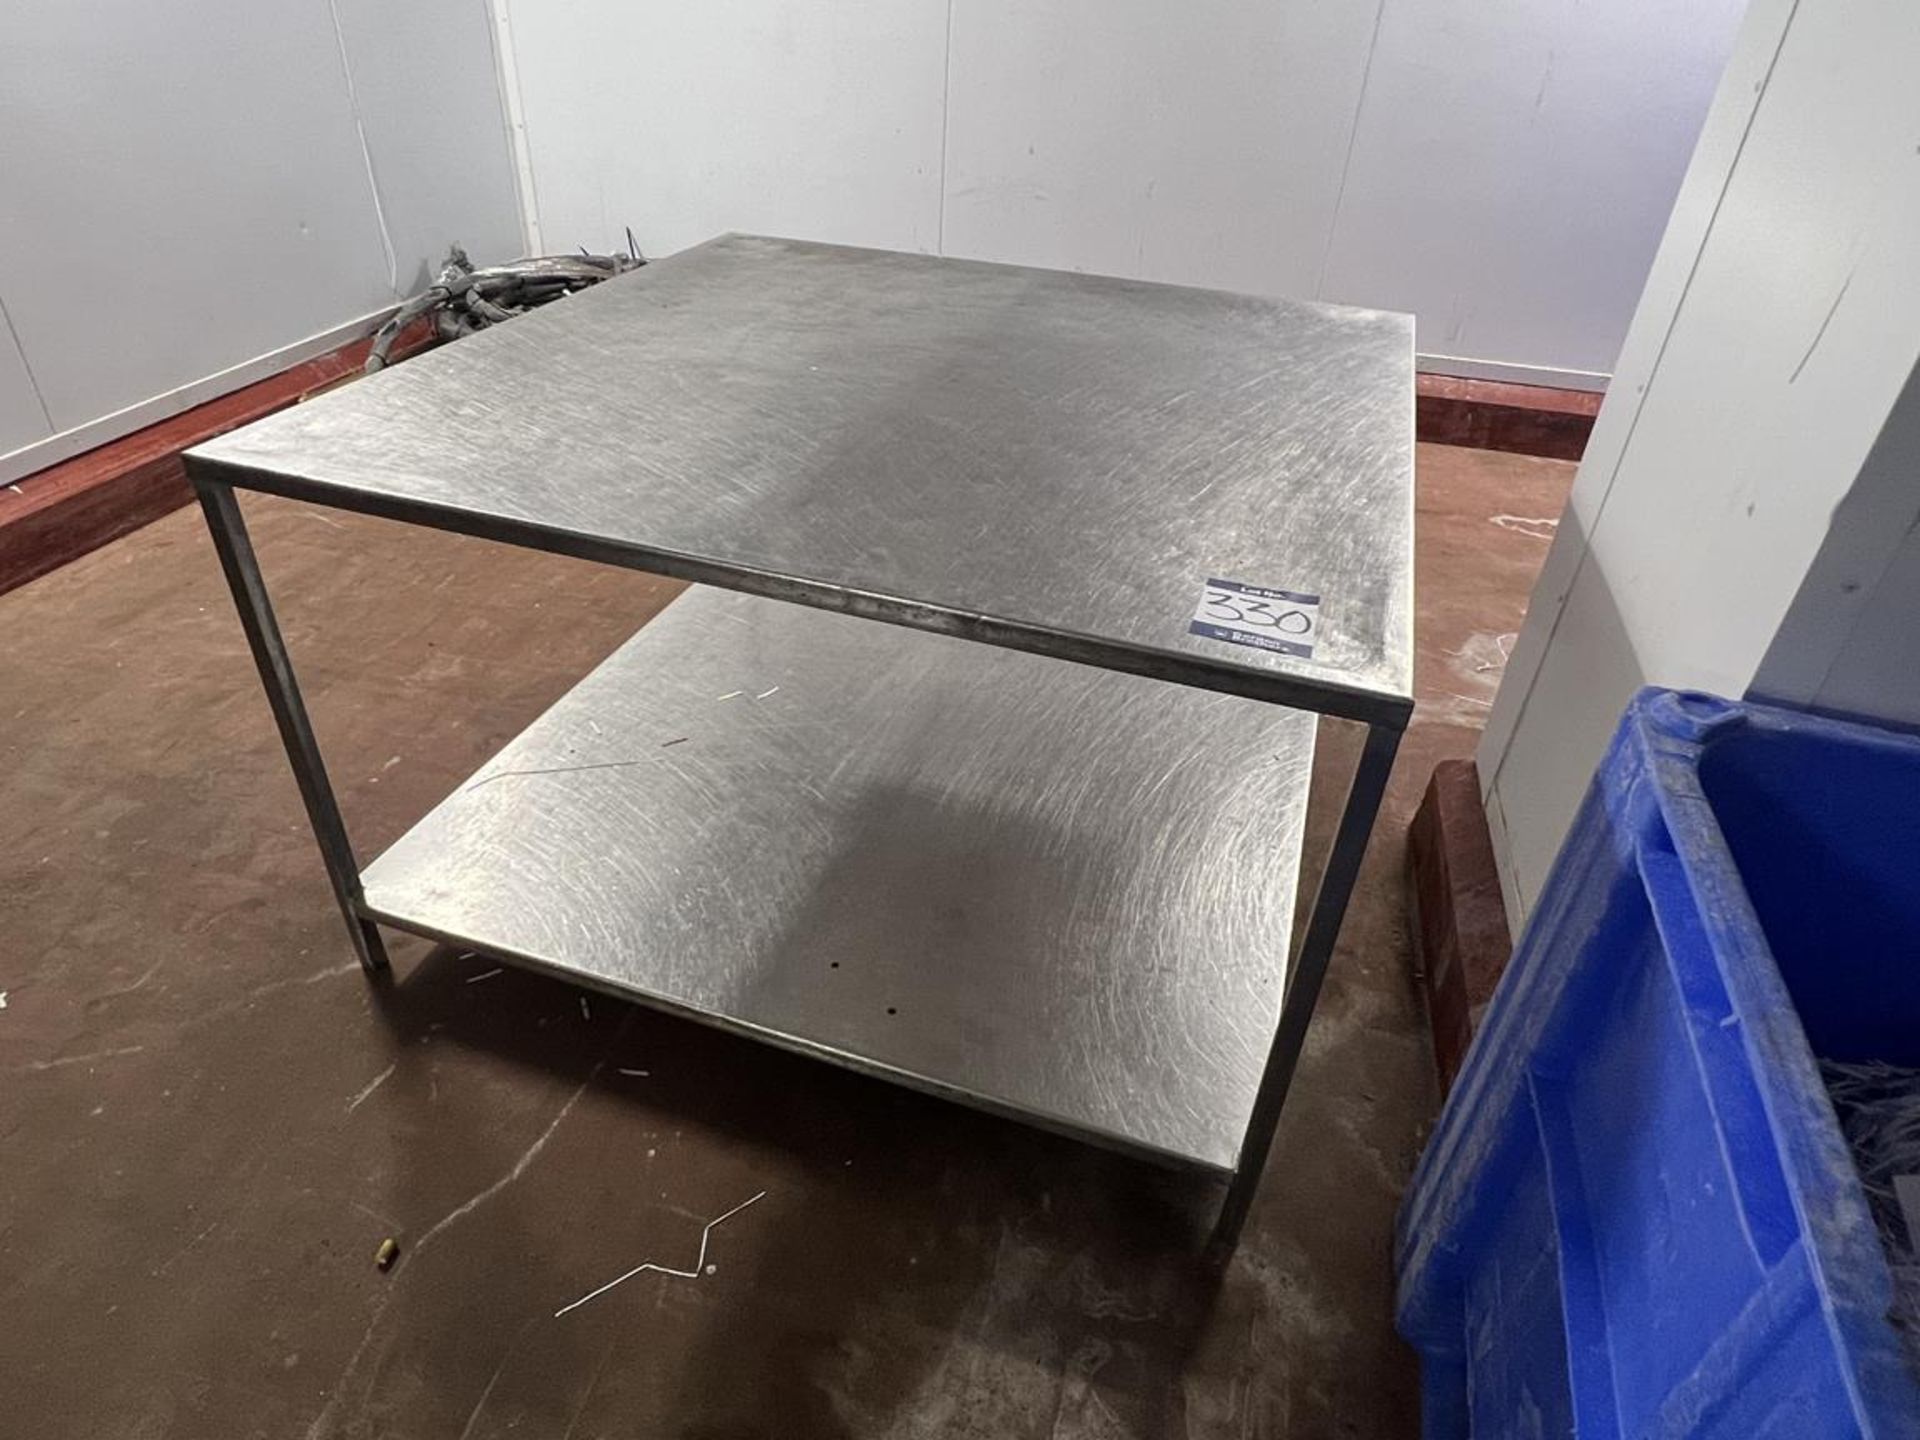 1200x1200mm stainless steel table with undershelf - Image 2 of 3